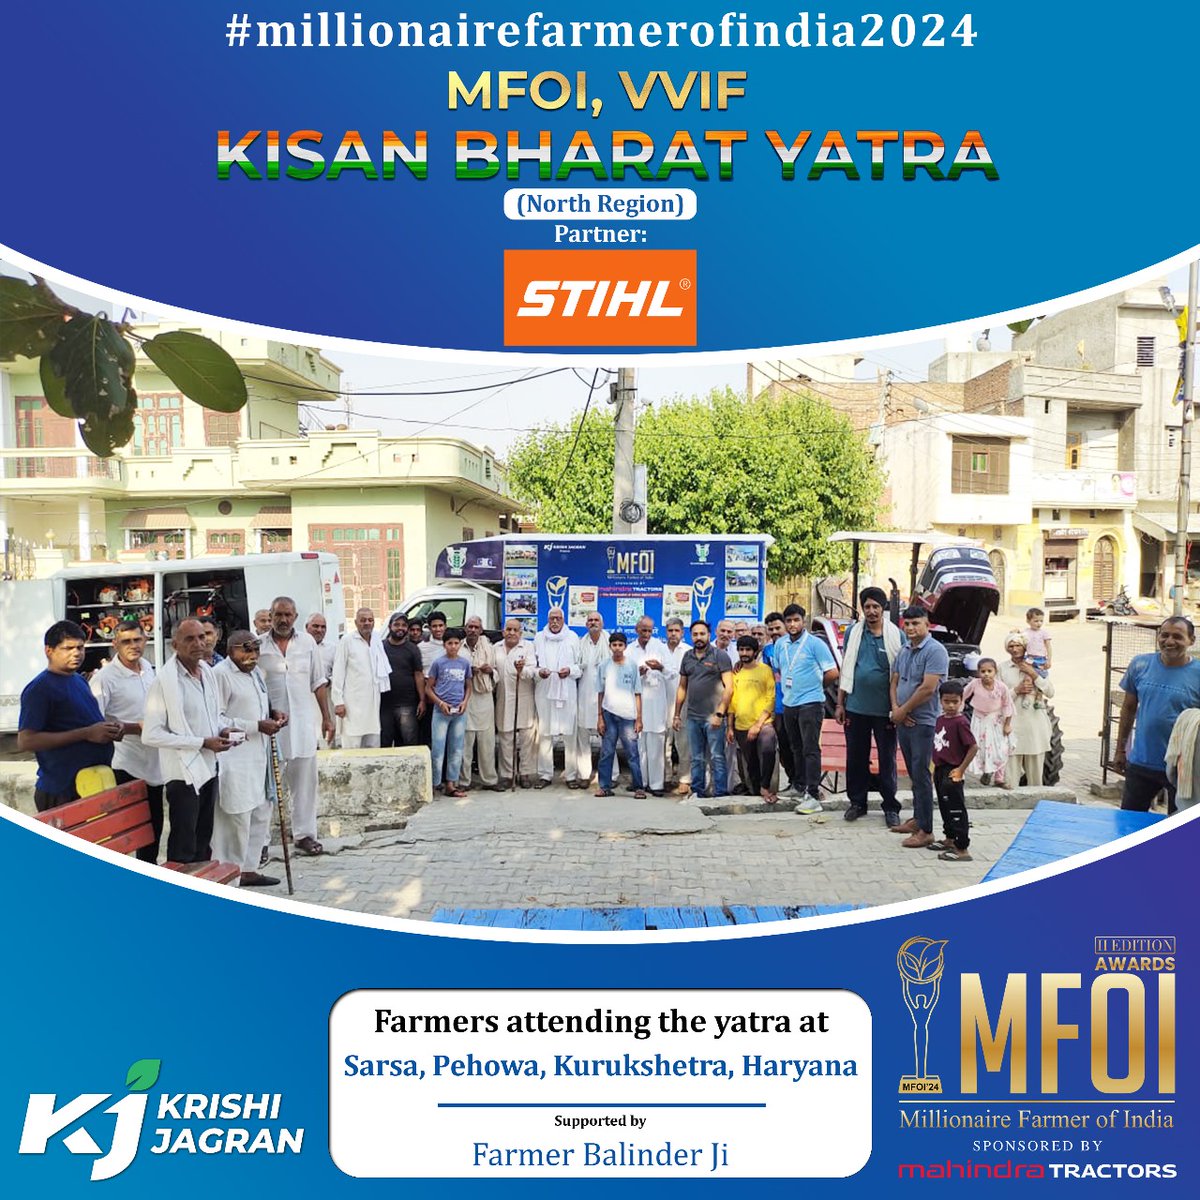 Krishi Jagran ‘MFOI, VVIF Kisan Bharat Yatra’ is making waves in the Northern region with STIHL India as its partner. Currently, farmers are attending the yatra at Dhanoura Jattan, Babein, Ladwa, Sarsa and Thana in Kurukshetra, Haryana. We are grateful to Preet Pal Singh,